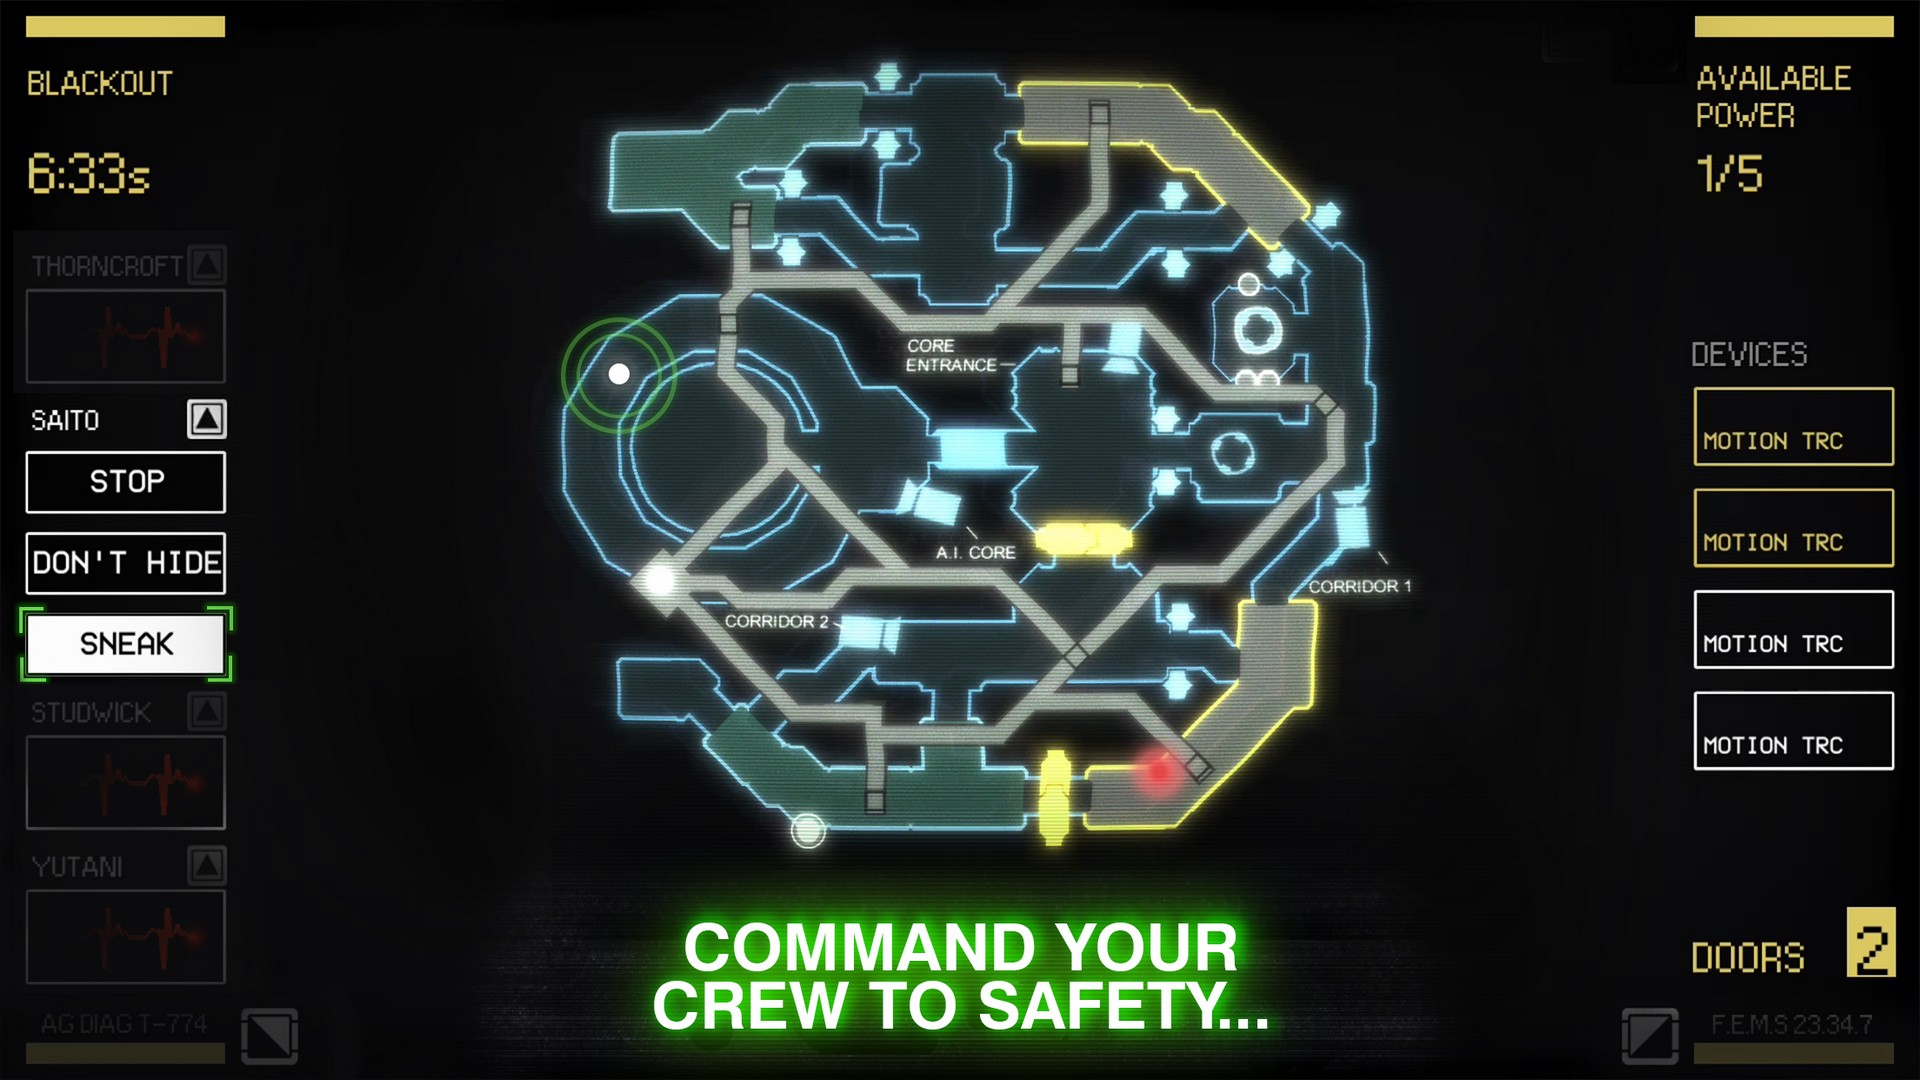 Alien-Blackout_Command-Your-Crew-to-Safety_Screenshot.jpg